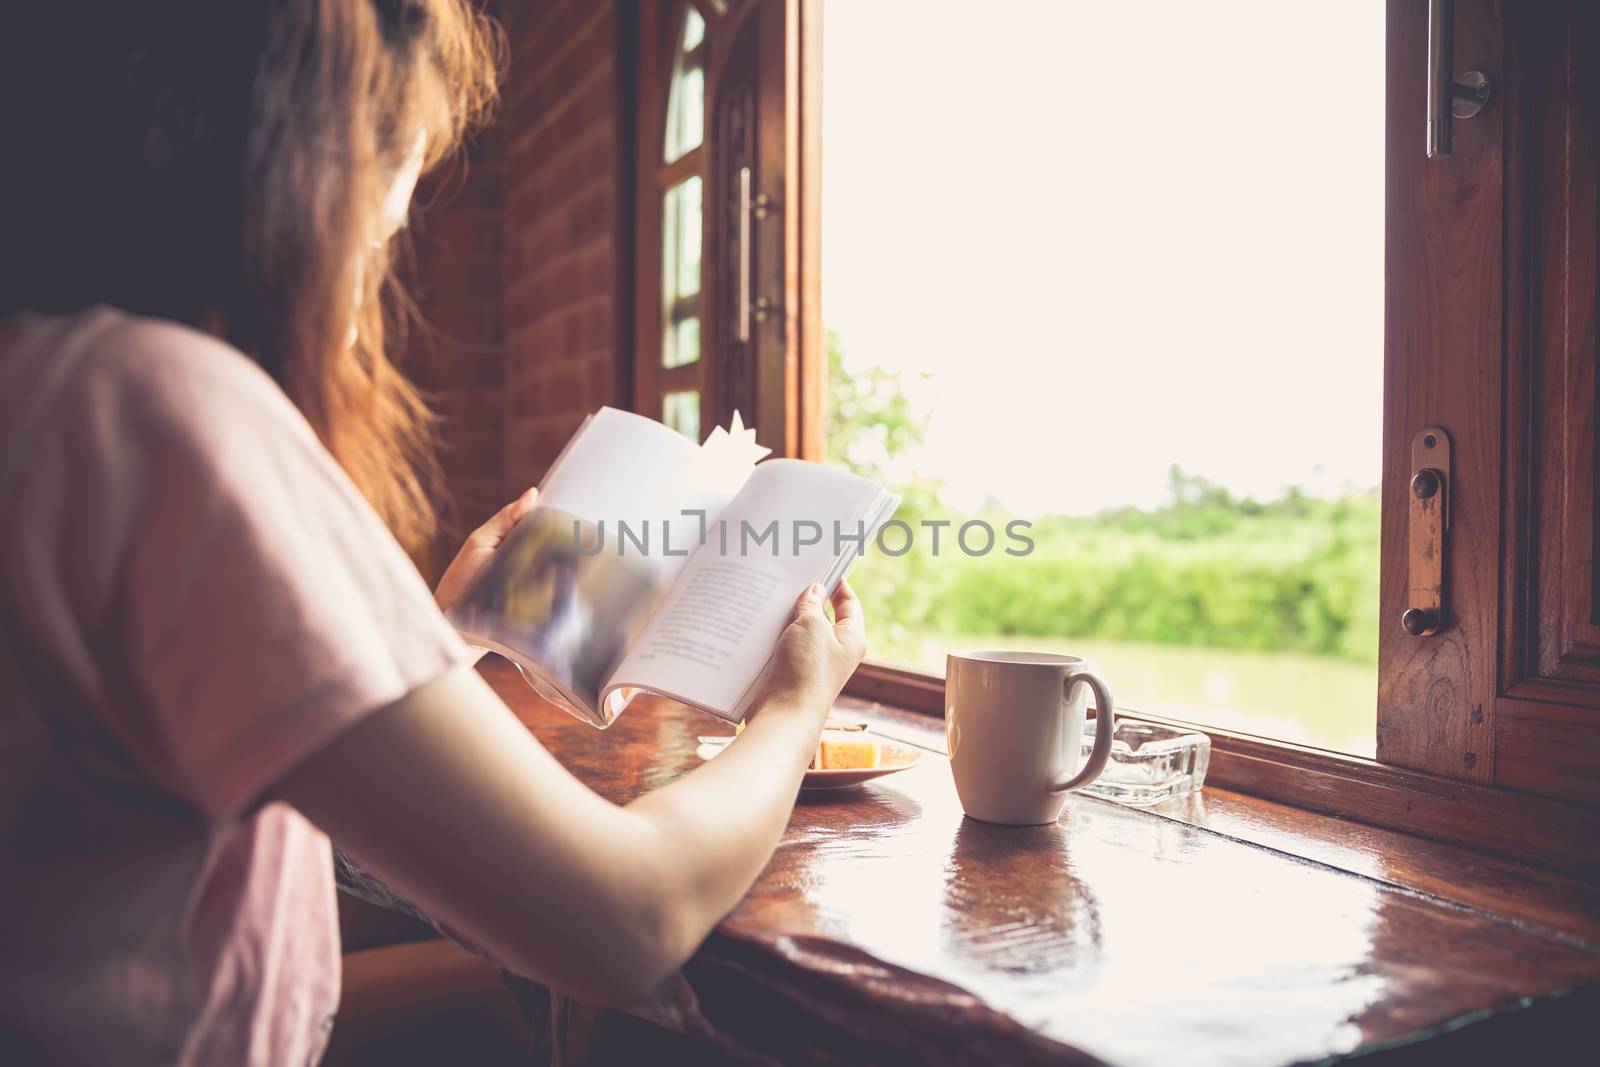 Lifestyle of woman reading a book and enjoy fresh coffee or tea in the morning at home. Sun is shining into the room. Light shines through the window. Happy time of country life. Vintage tone.